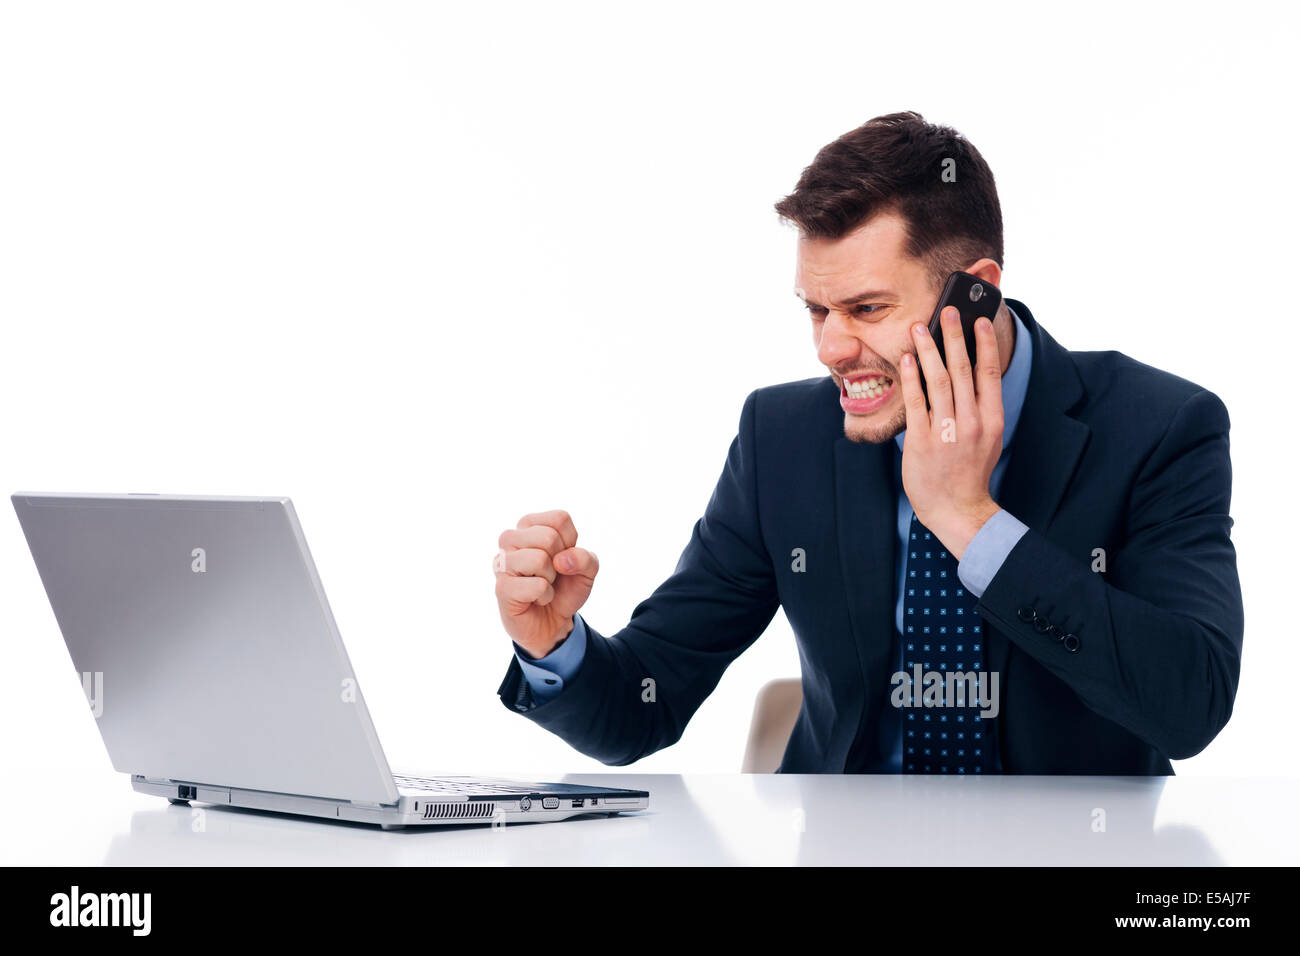 Stressful work in the office, Debica, Poland Stock Photo